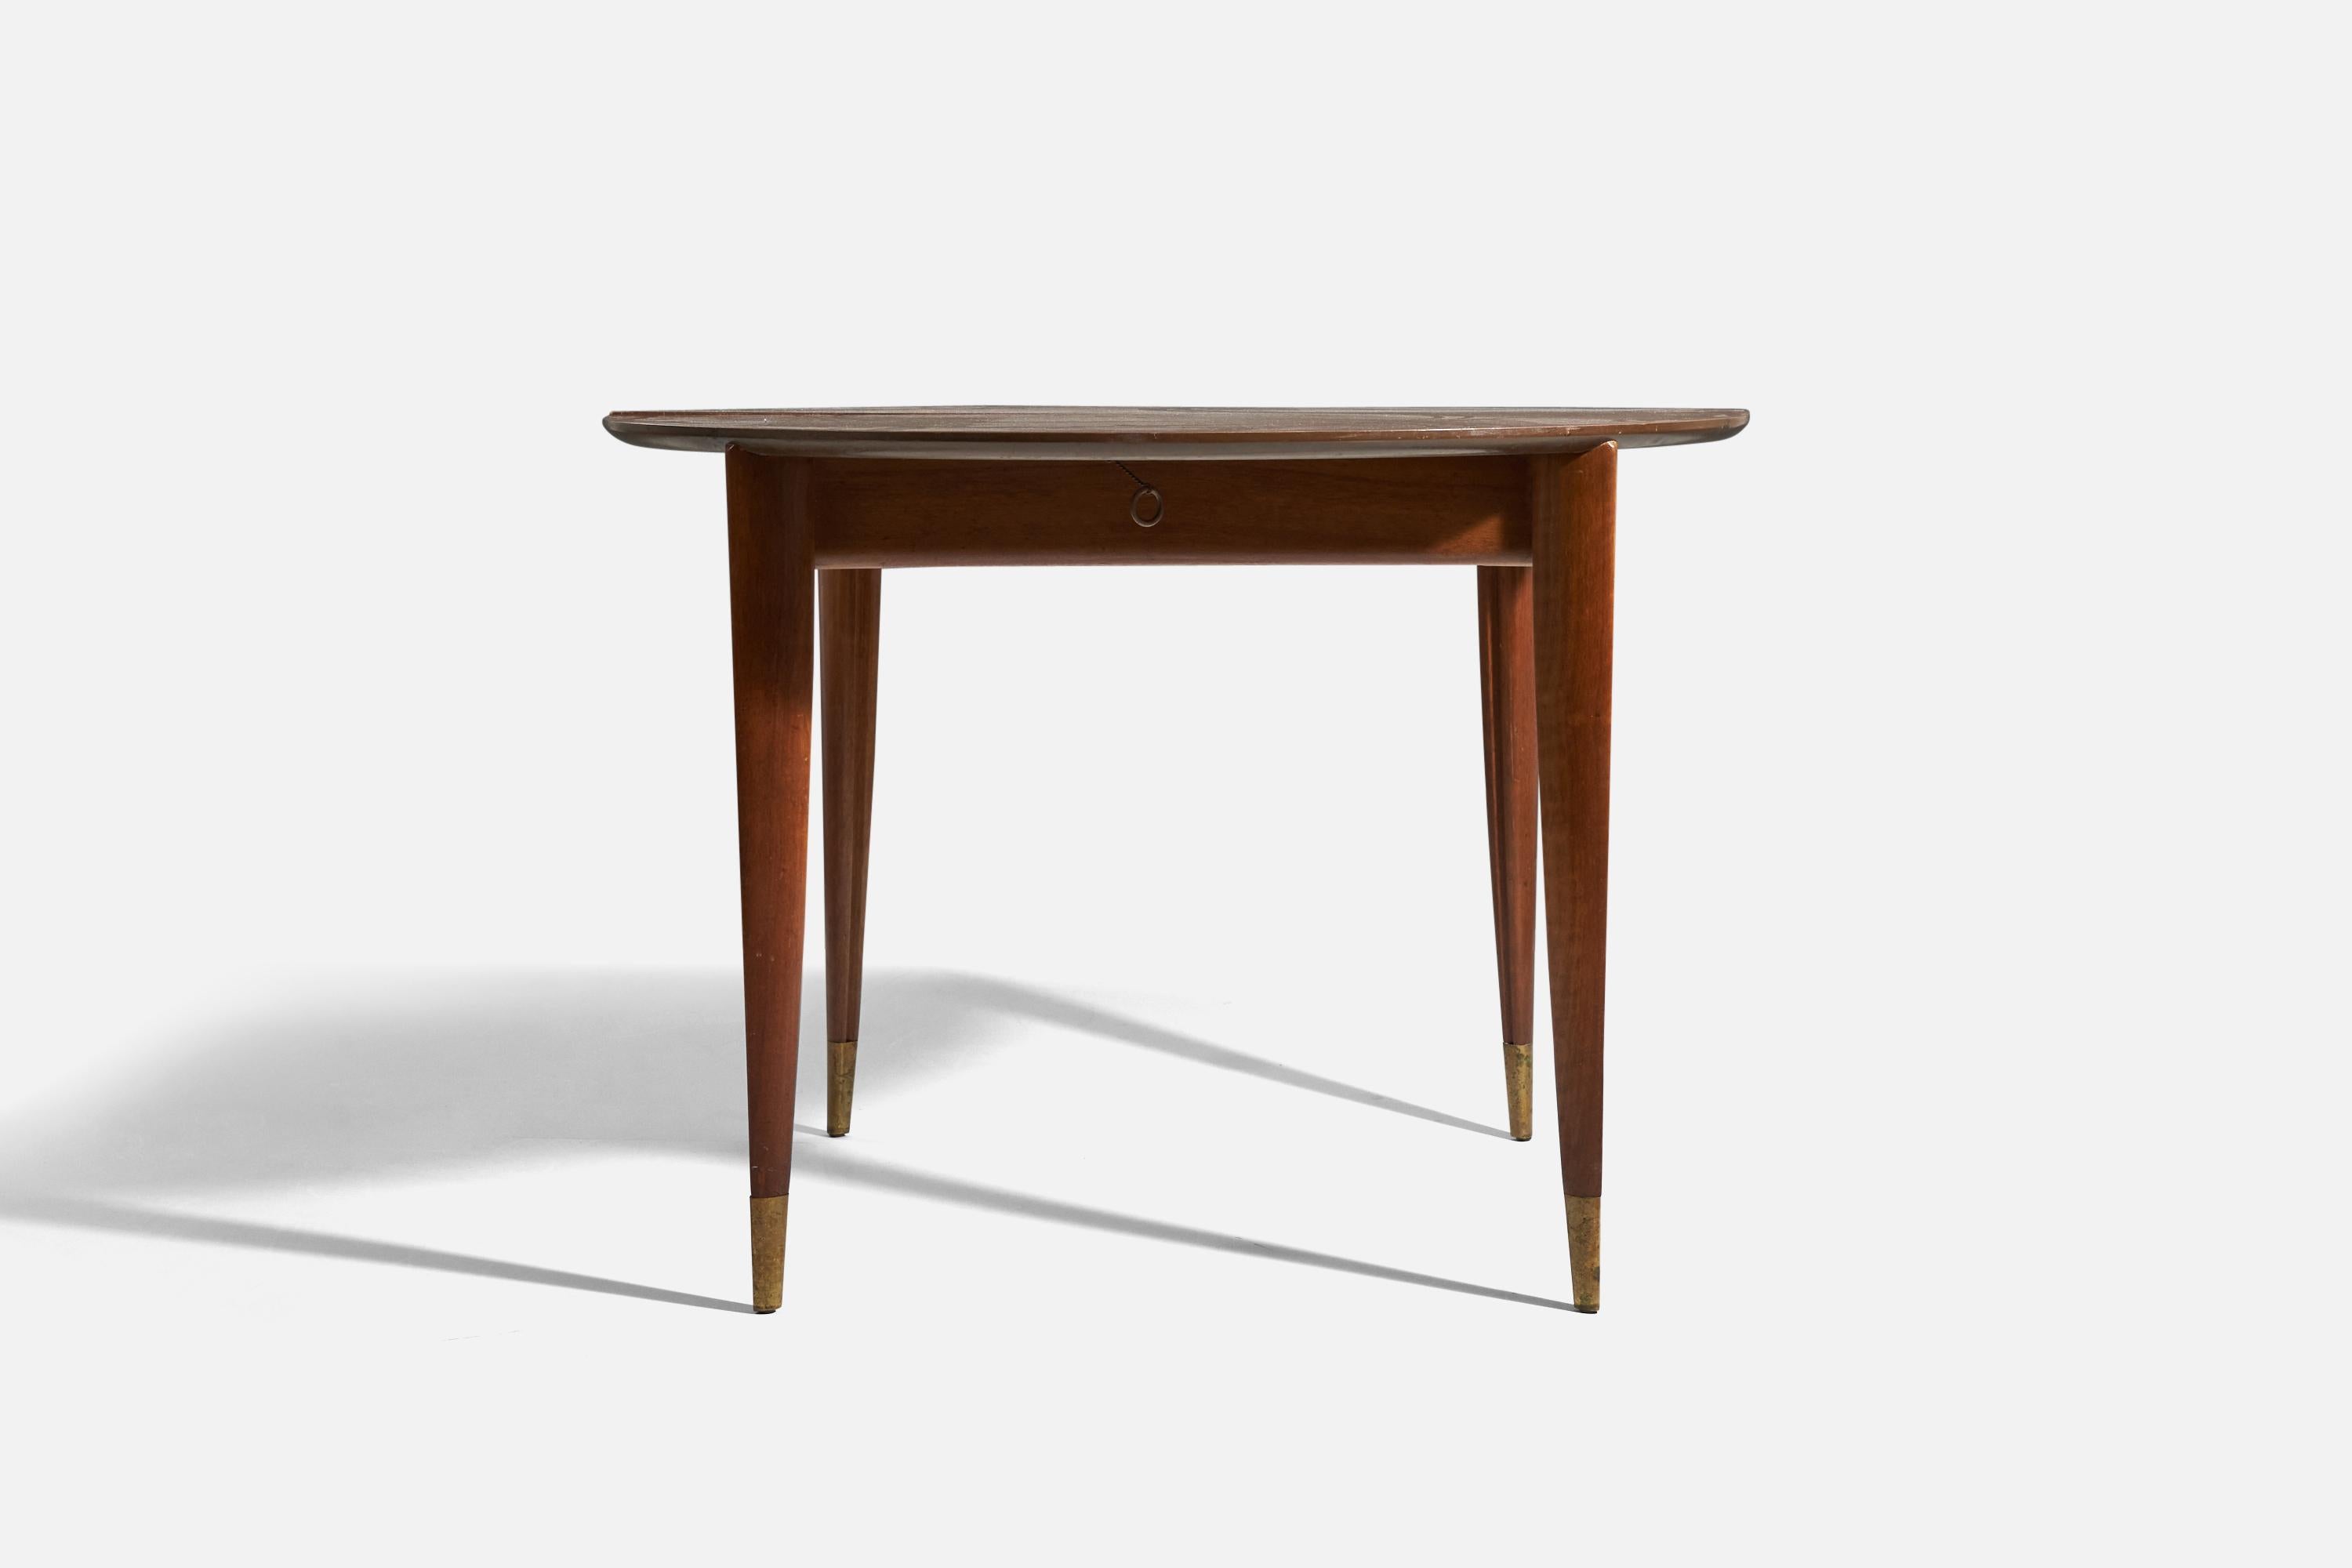 Mid-Century Modern Gio Ponti, Dining Table, Walnut, Brass, Singer & Sons, United States, 1950s For Sale